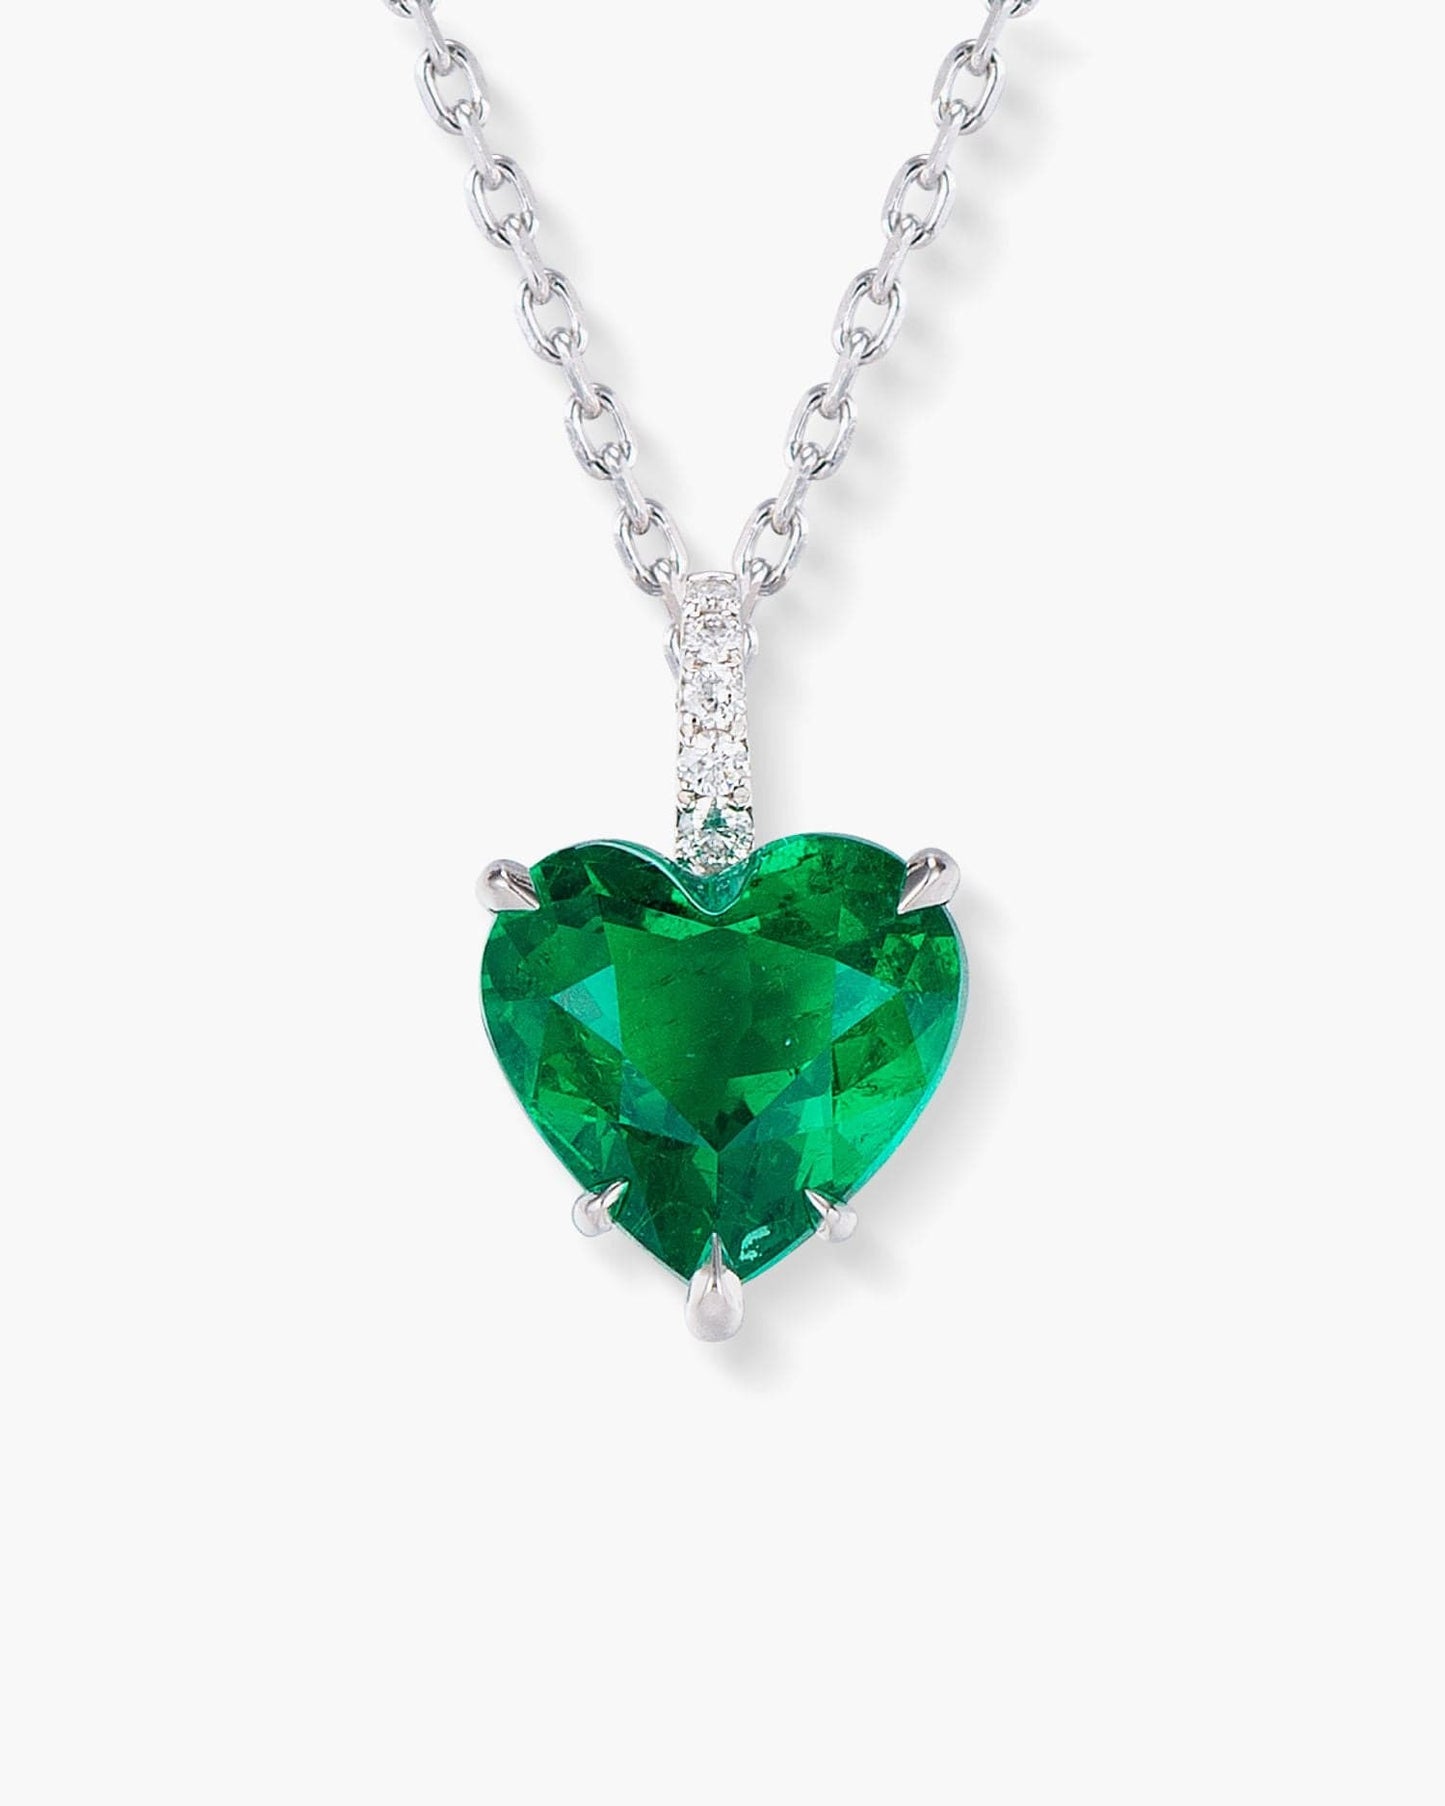 Platinum, White Gold, 18.72ct Colombian Emerald And Diamond Pendant Necklace  Available For Immediate Sale At Sotheby's